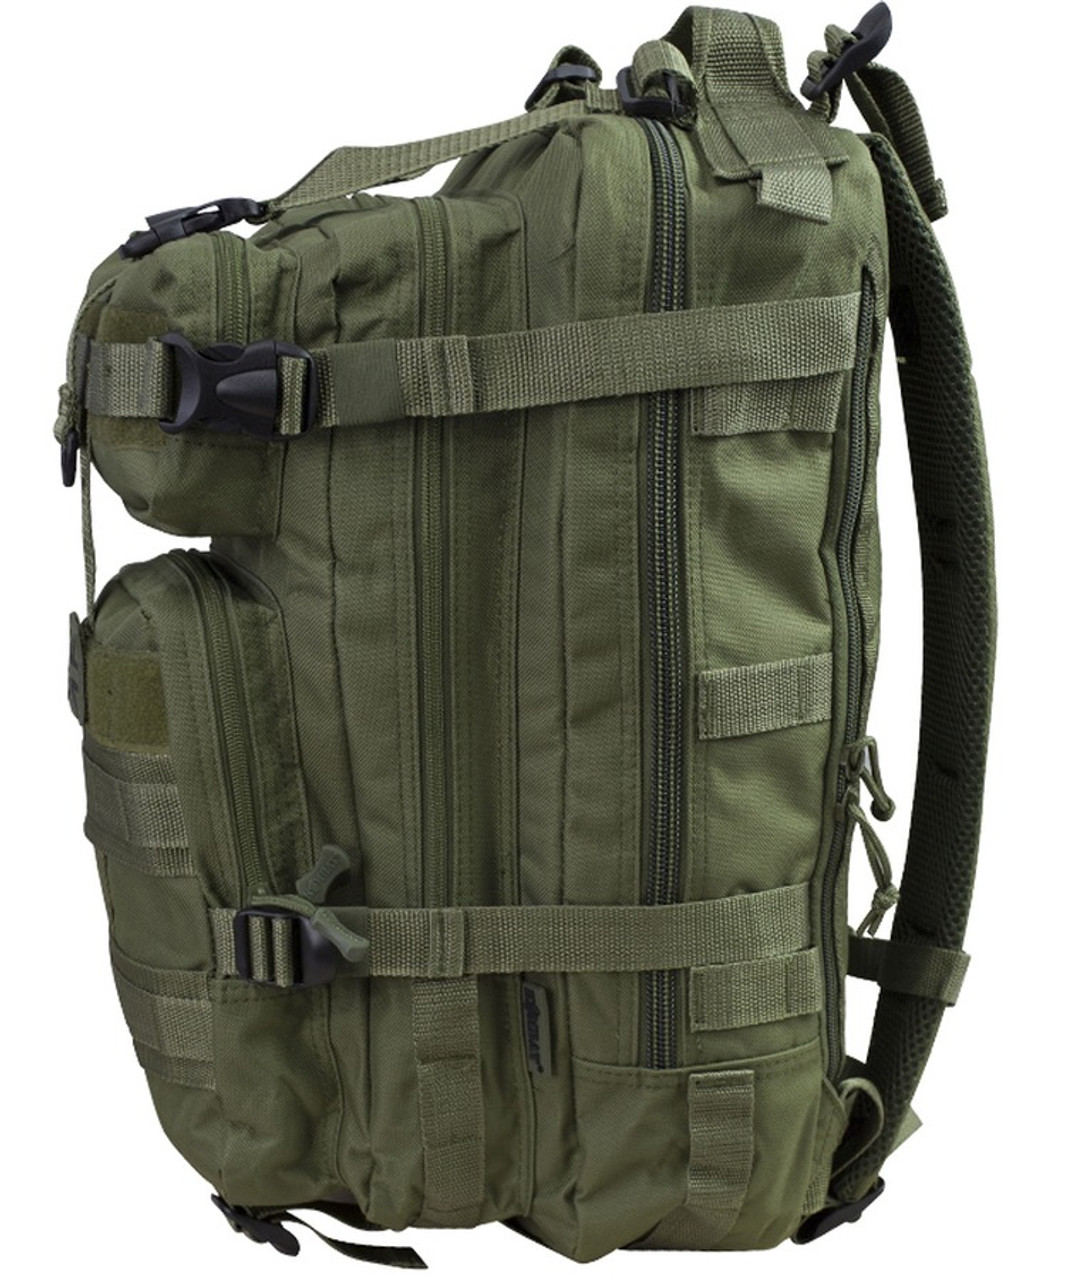 Stealth Pack - 25ltr - Olive Green - Jax First Aid